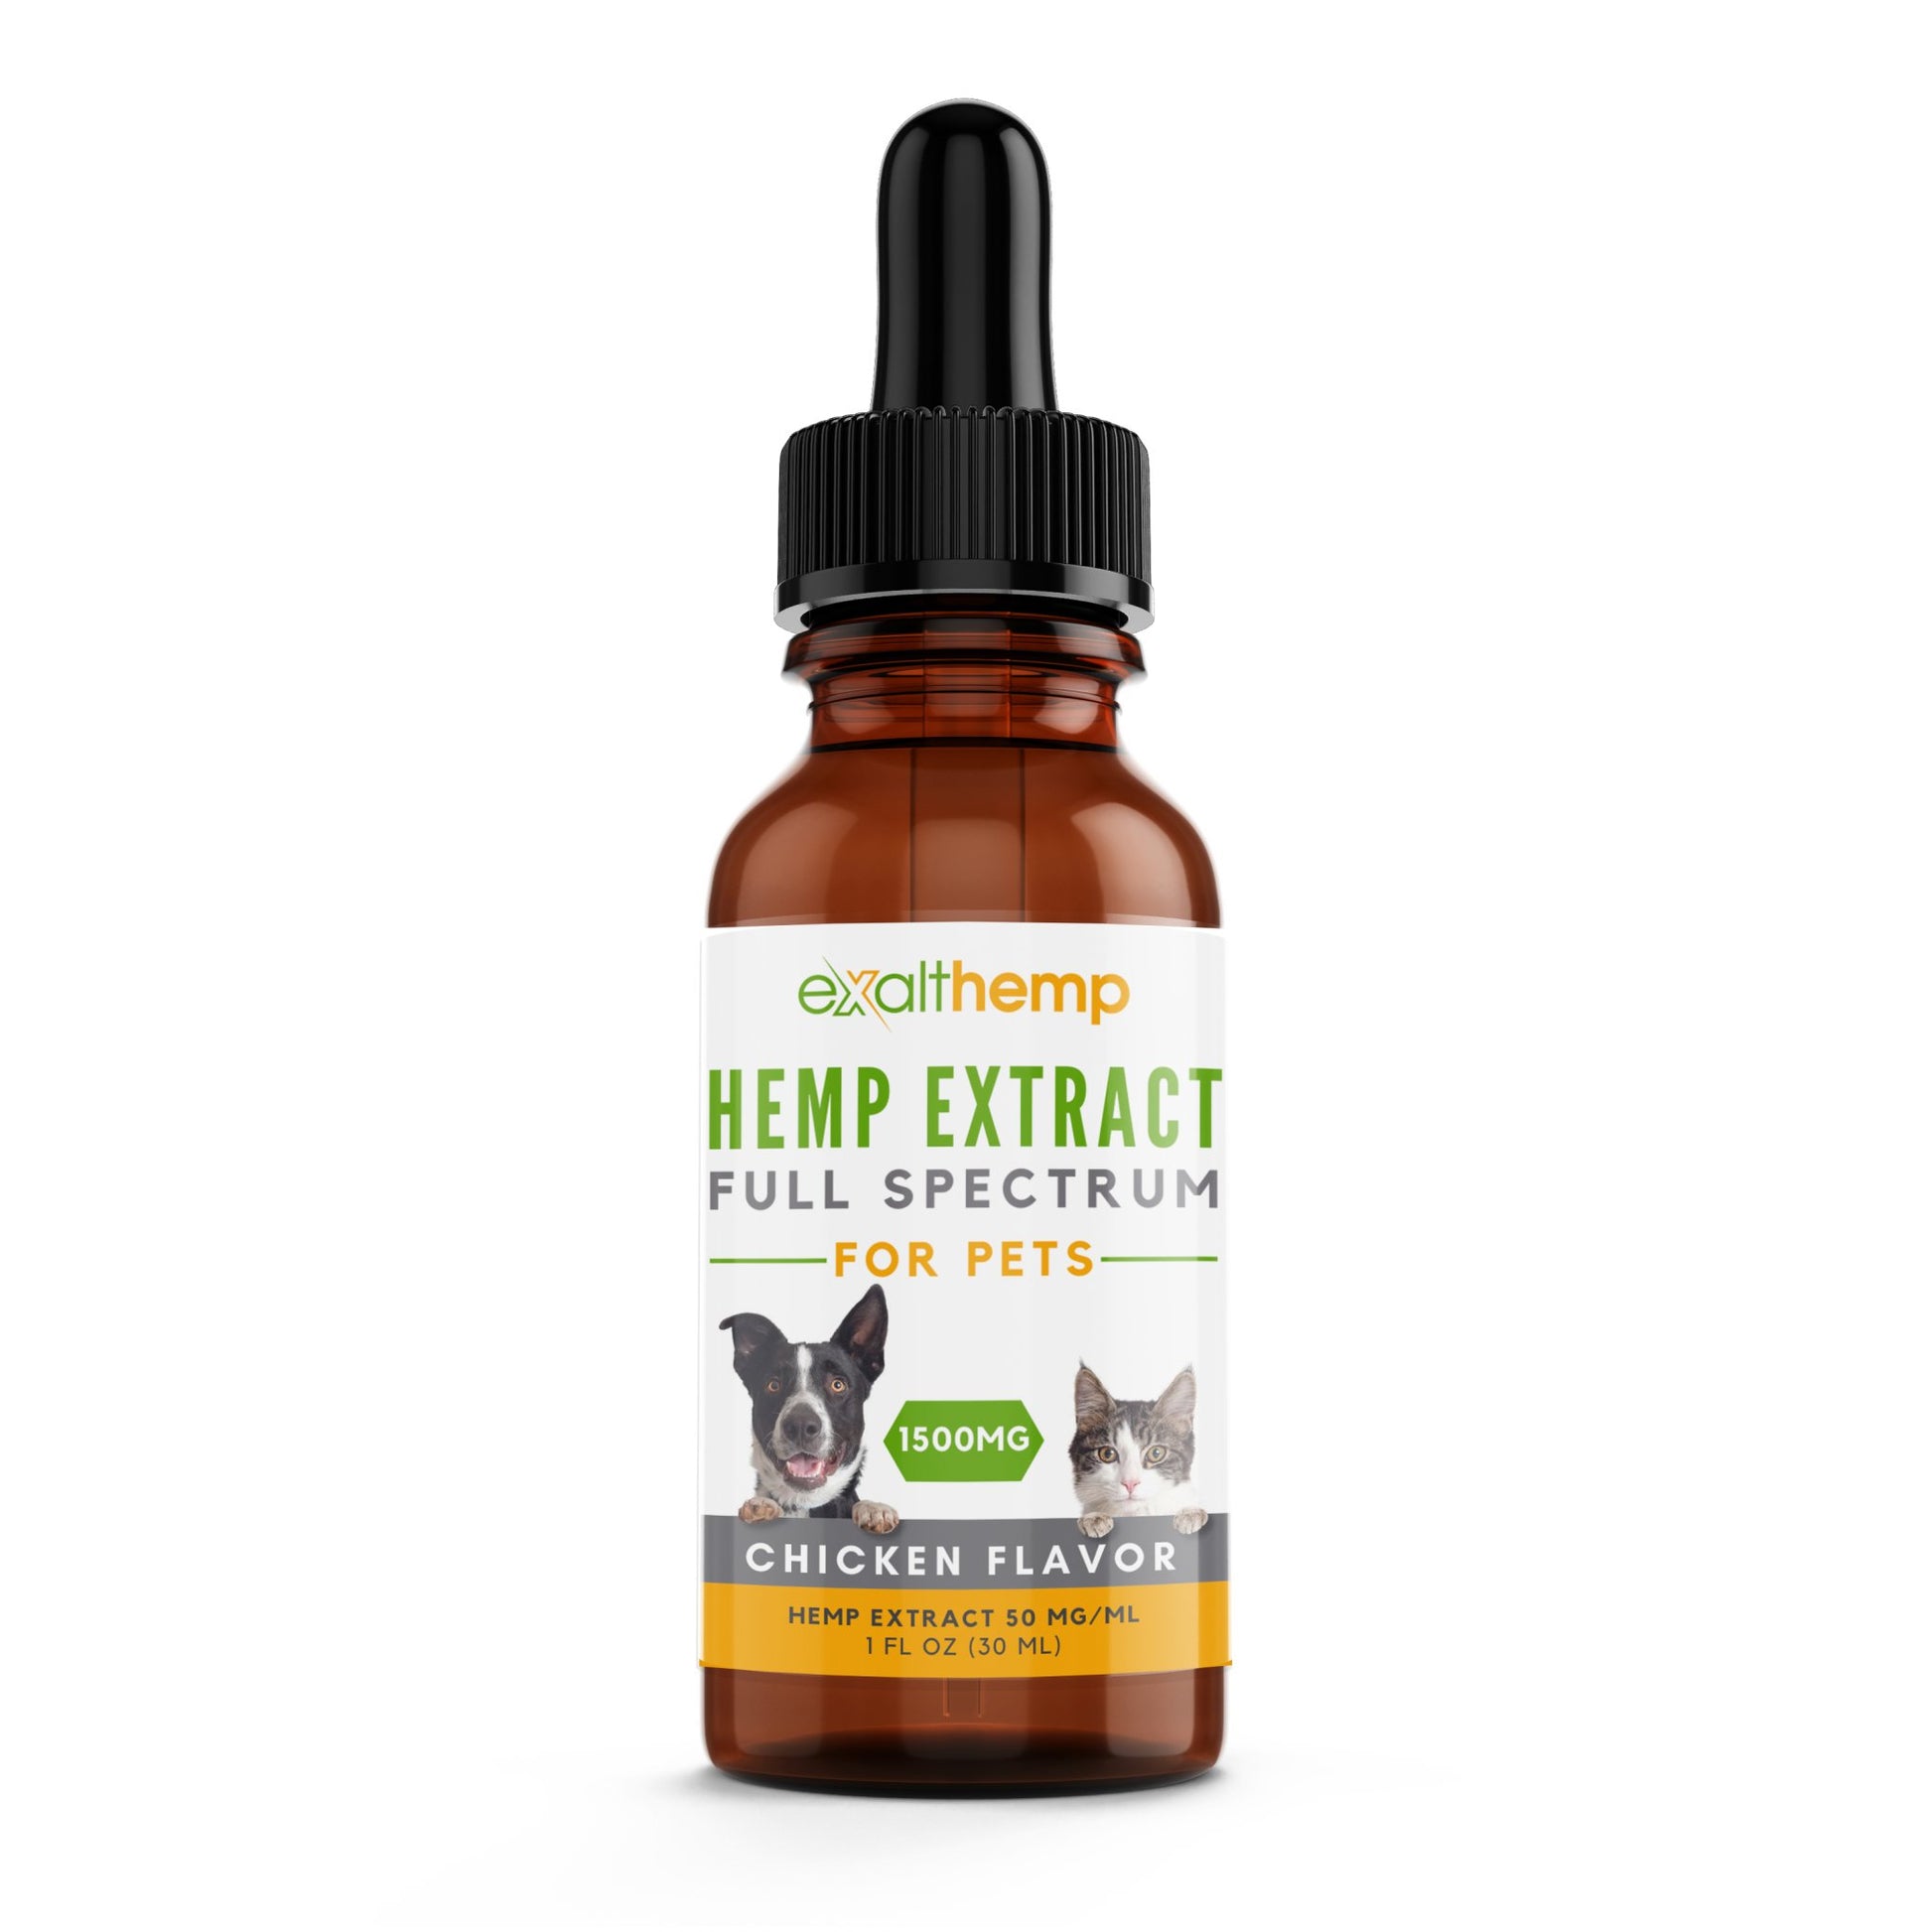 Hemp Extract Oil for Pets - Chicken Flavor - Full Spectrum 600mg or 1500mg - ExaltHemp